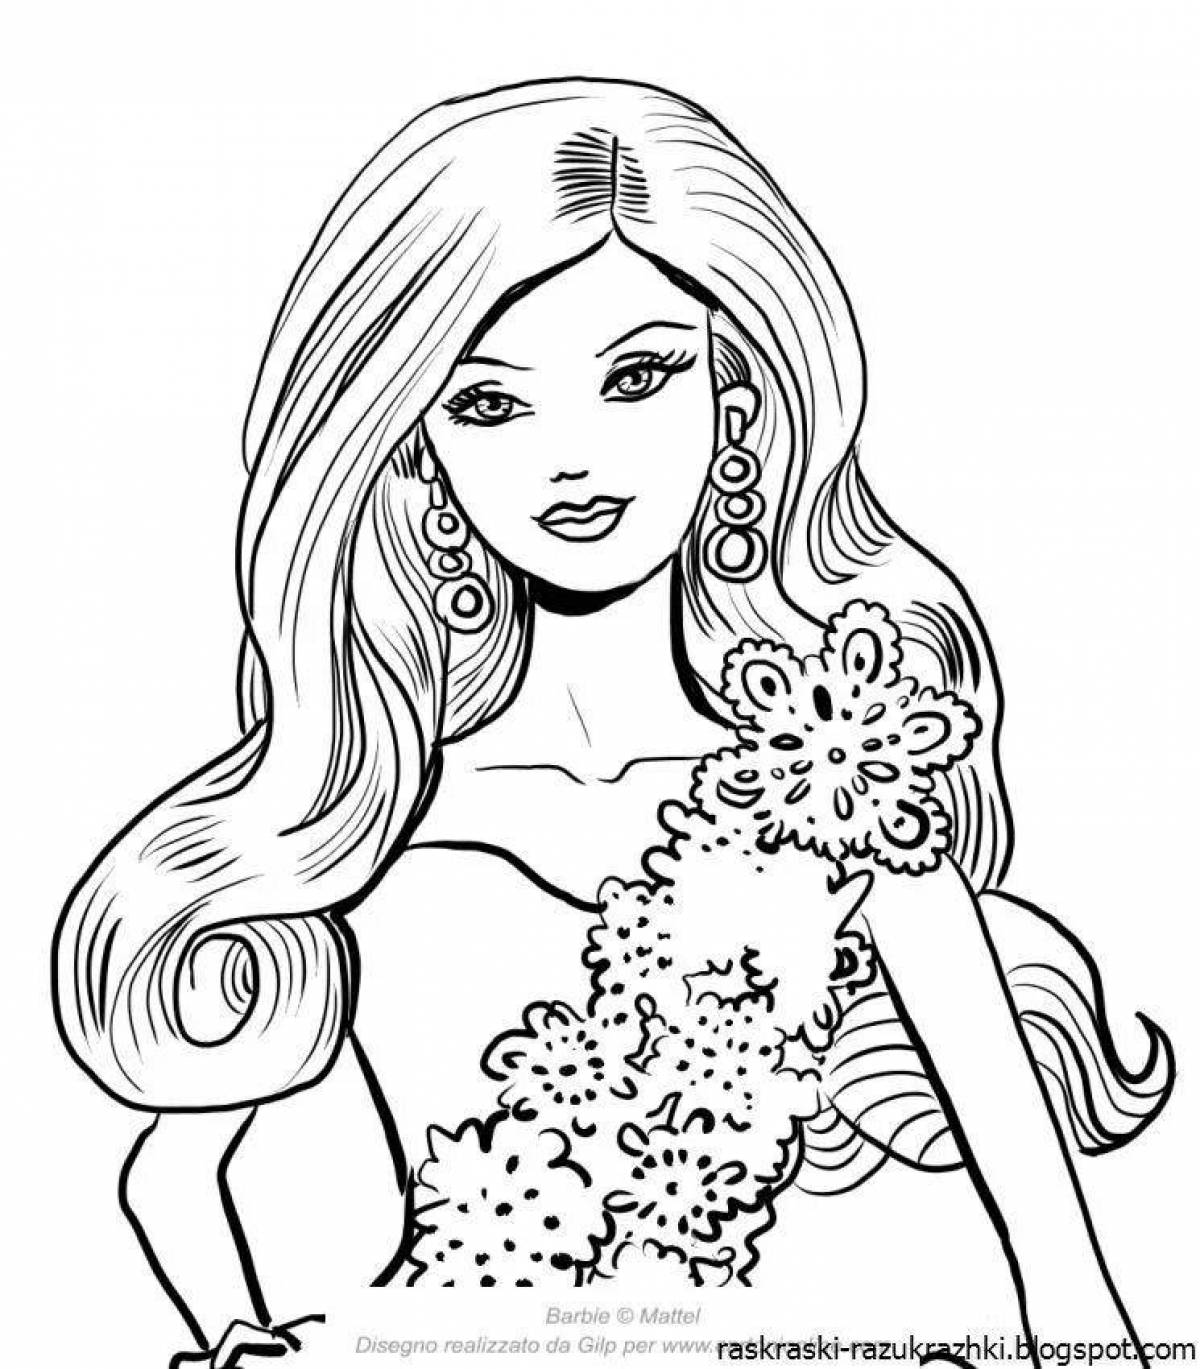 Awesome barbie coloring page